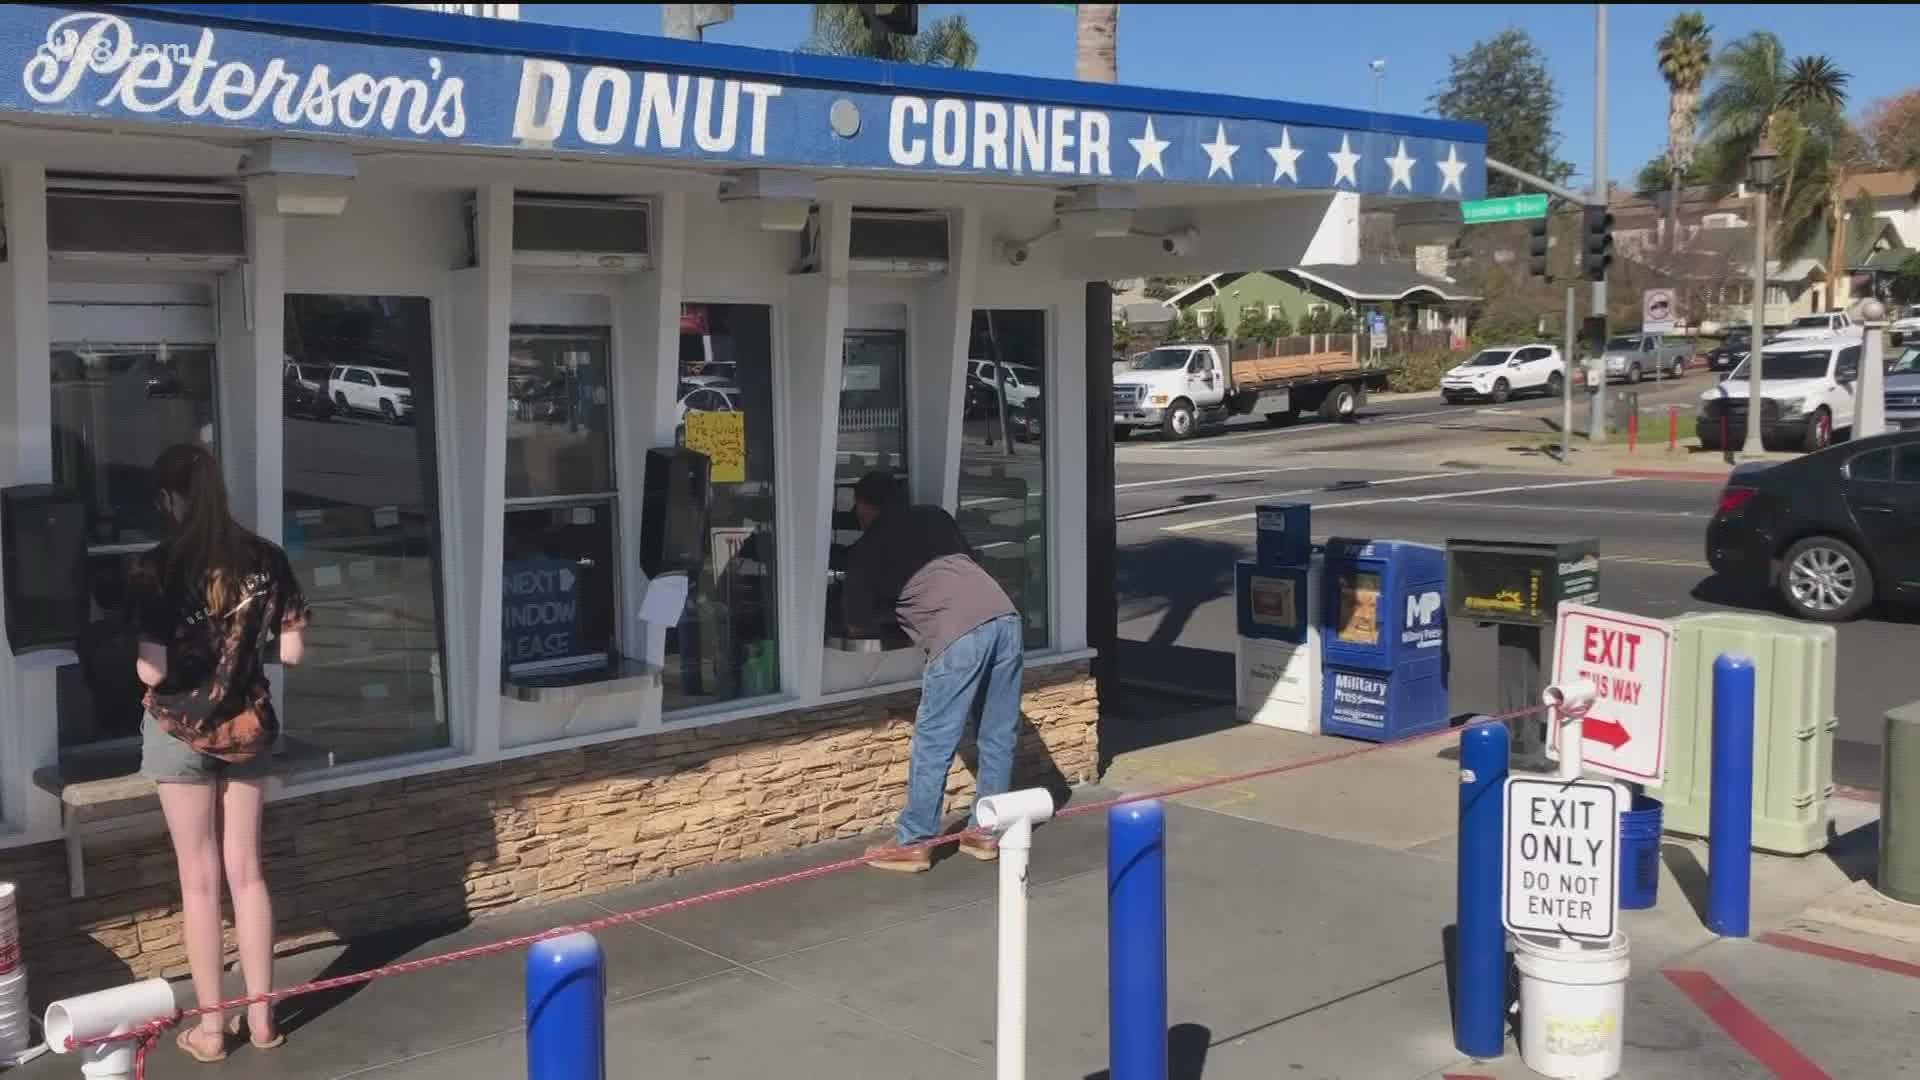 The iconic Escondido donut shop was family owned since 1981 before being sold in 2021.